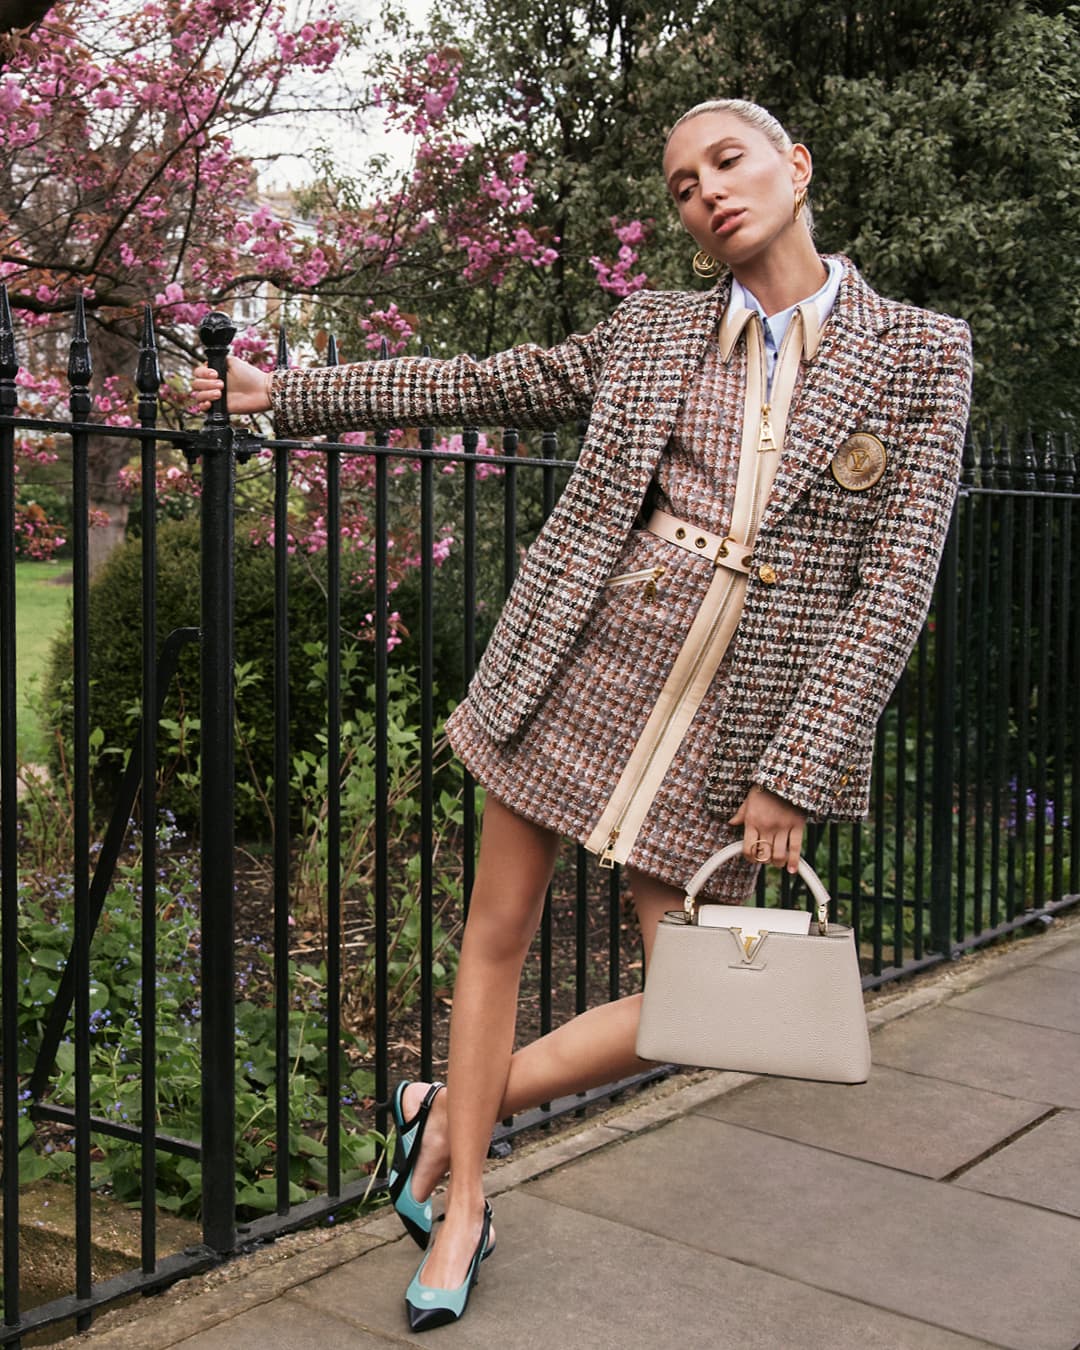 Louis Vuitton Capucines Bag Fall 2022 Ad Campaign | The Impression